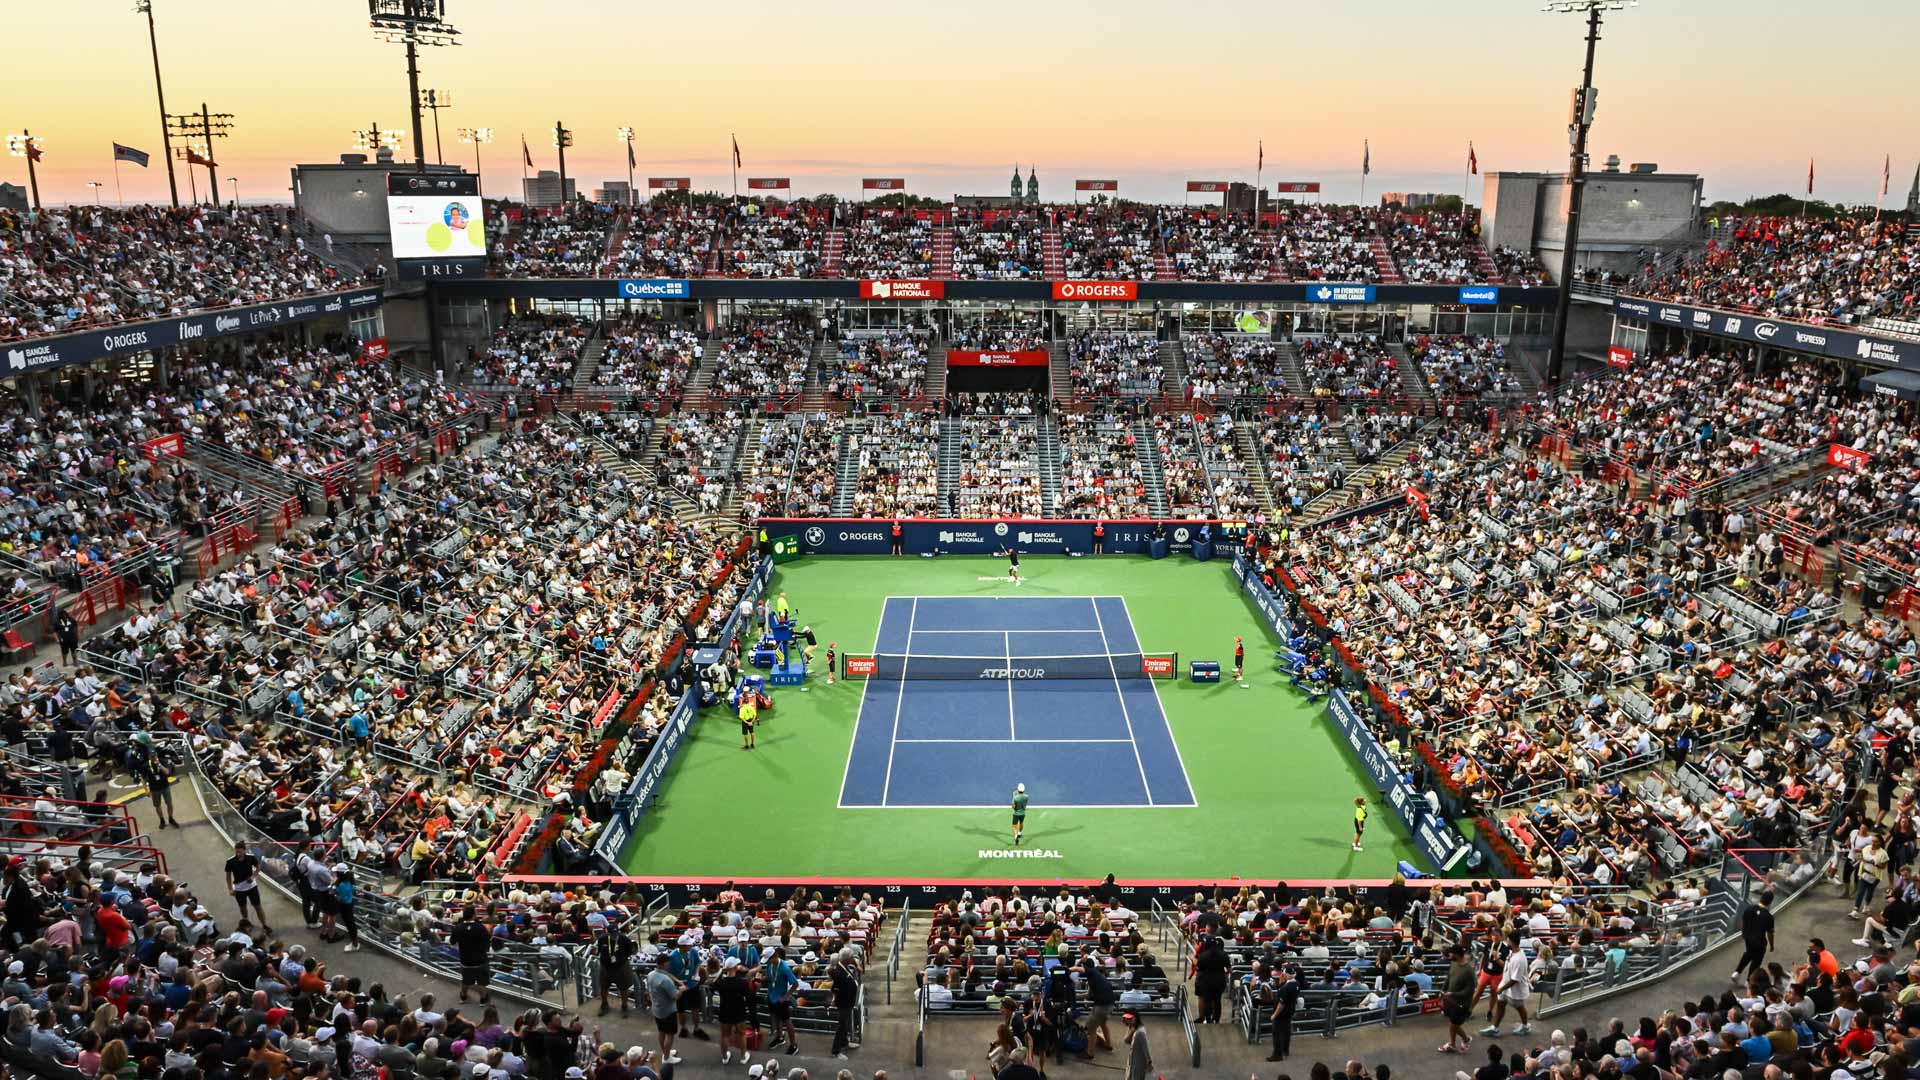 The National Bank Open presented by Rogers runs from 6-12 August in Montreal.